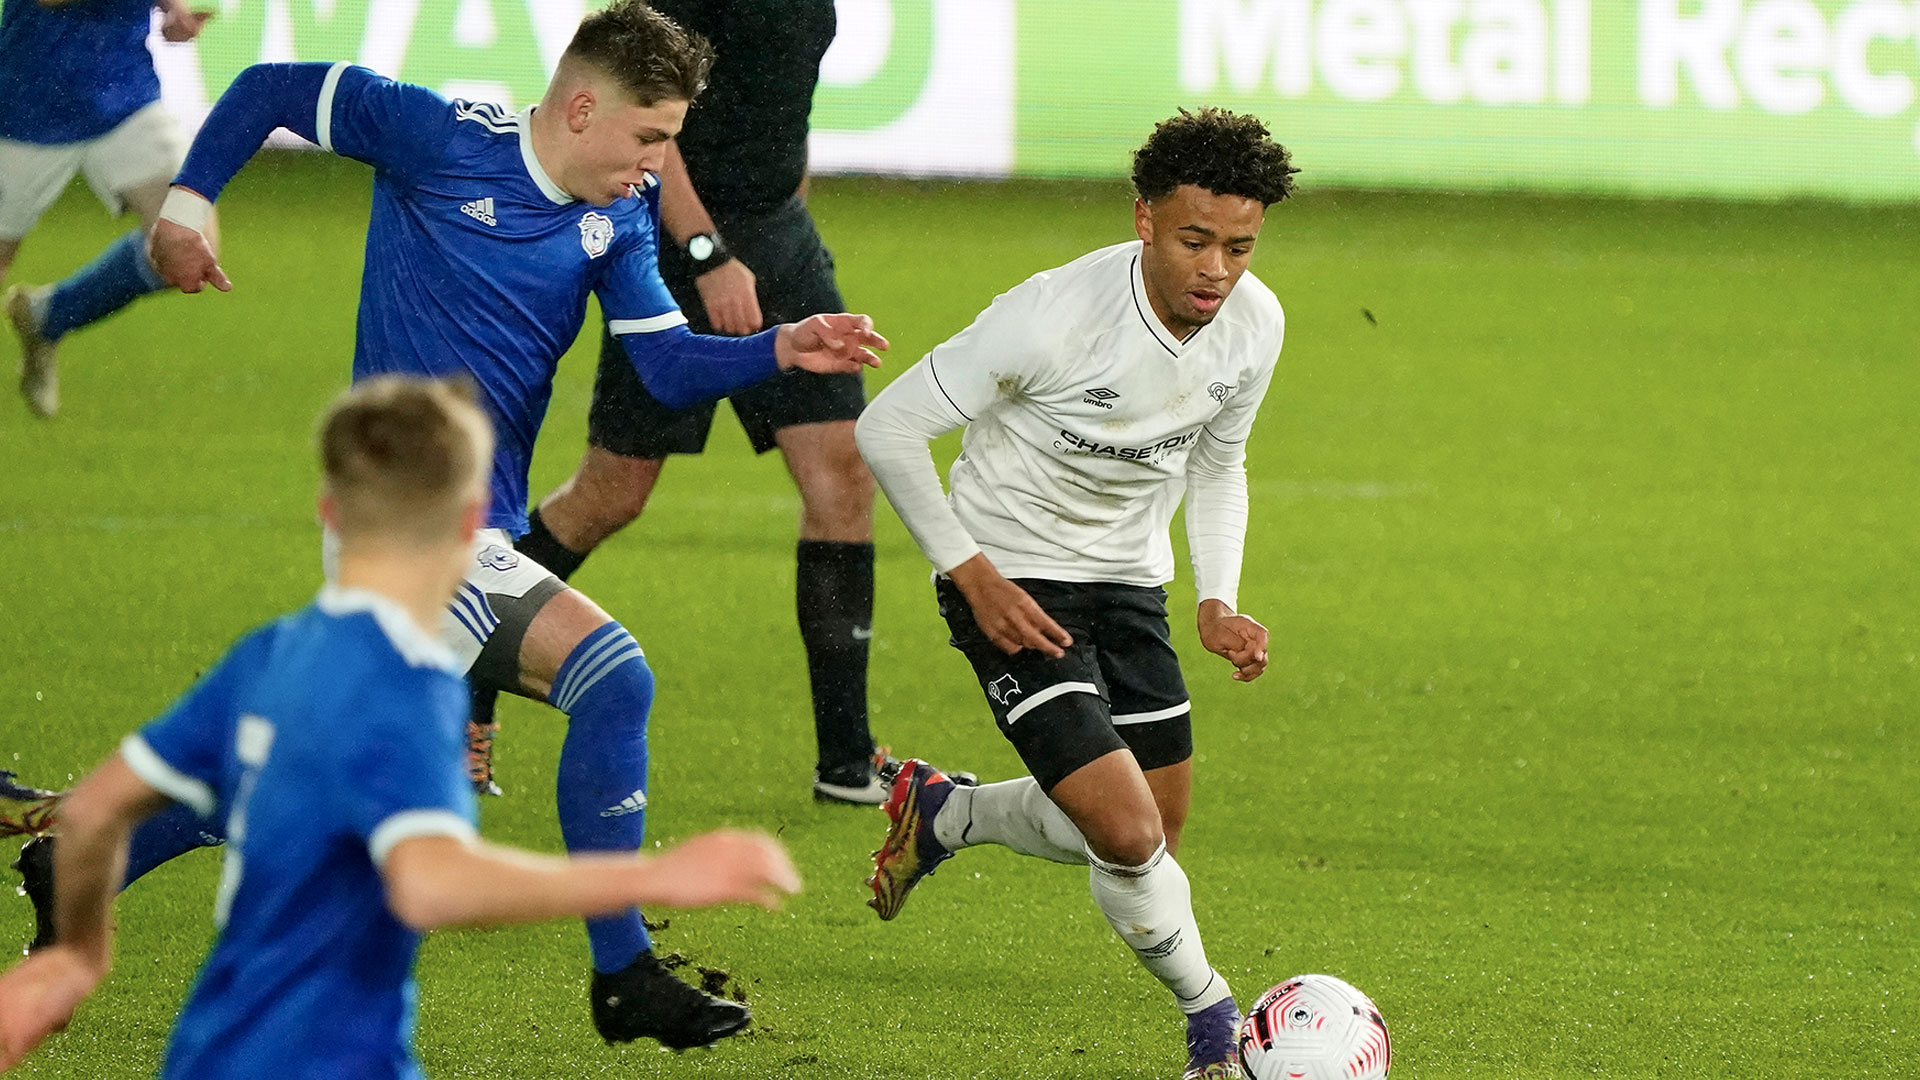 City in FA Youth Cup action at Pride Park...